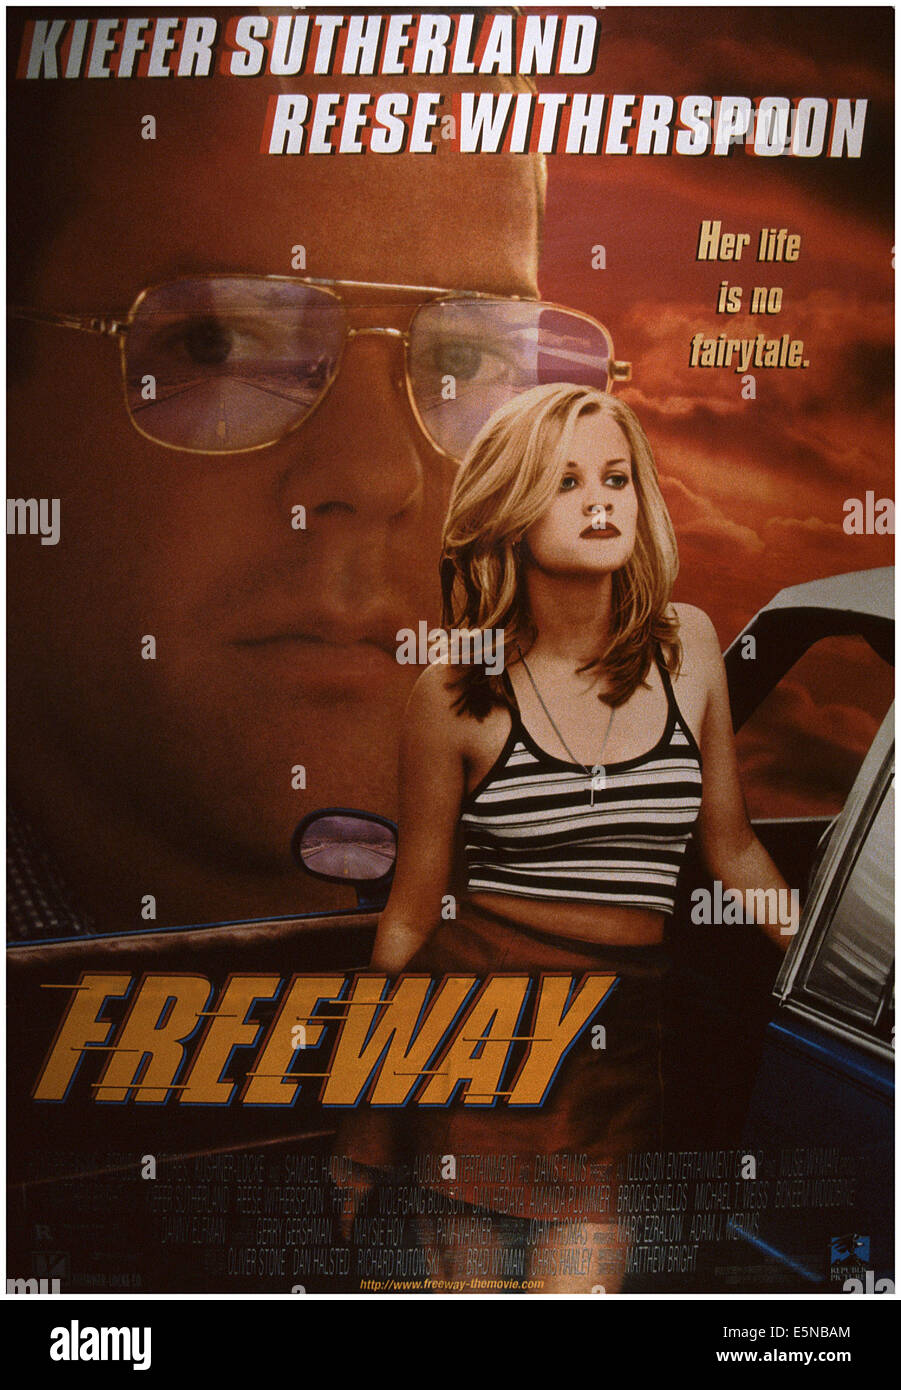 FREEWAY, Kiefer Sutherland (rear), Reese Witherspoon, 1996, © Roxie Releasing/courtesy Everett Collection Stock Photo